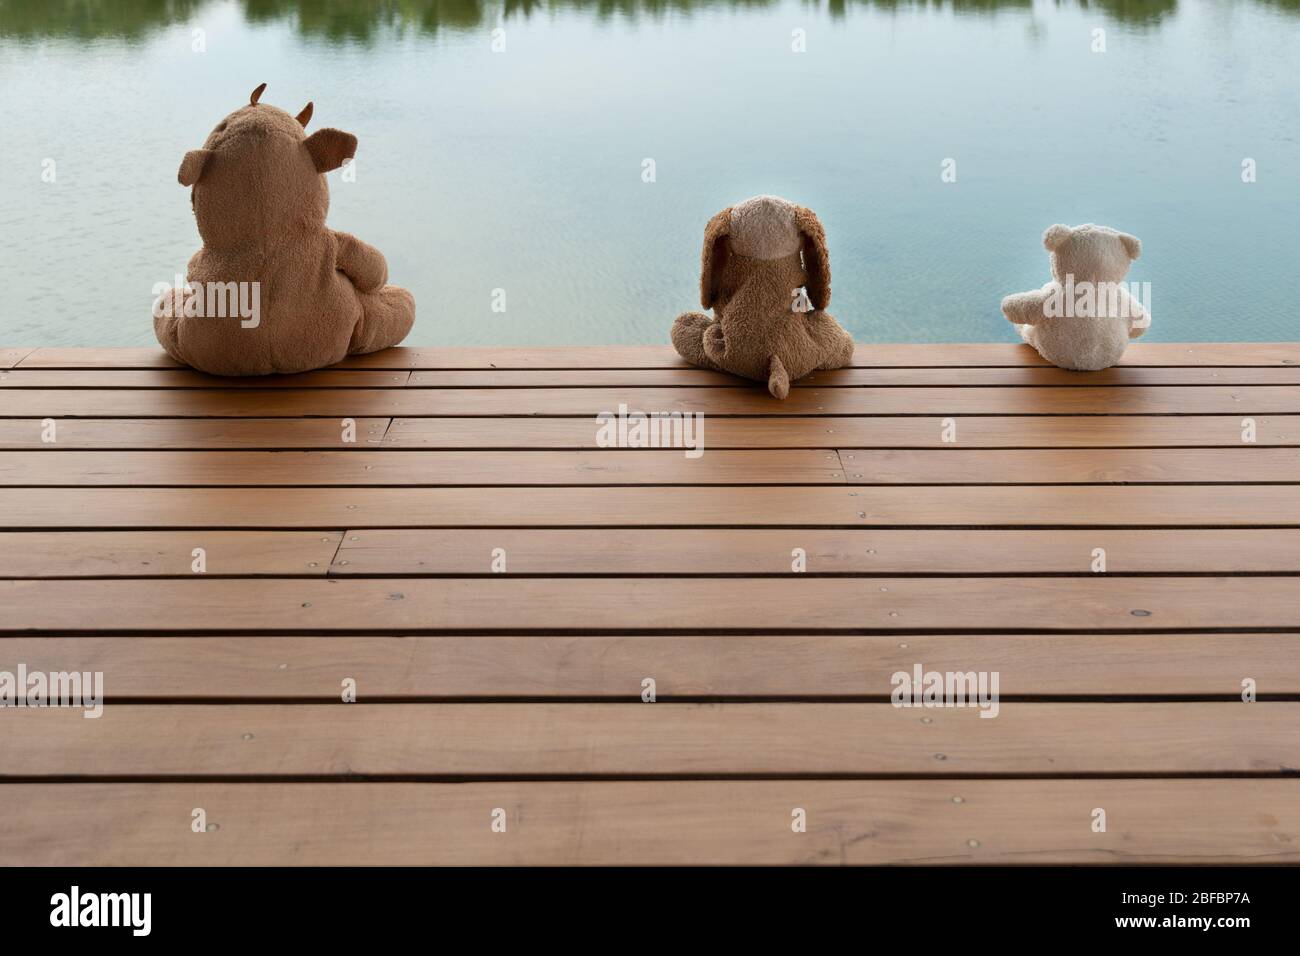 three fluffy small brown rhino dog and white bear doll sitting on wood terrace with blue nature water in social distancing concept Stock Photo